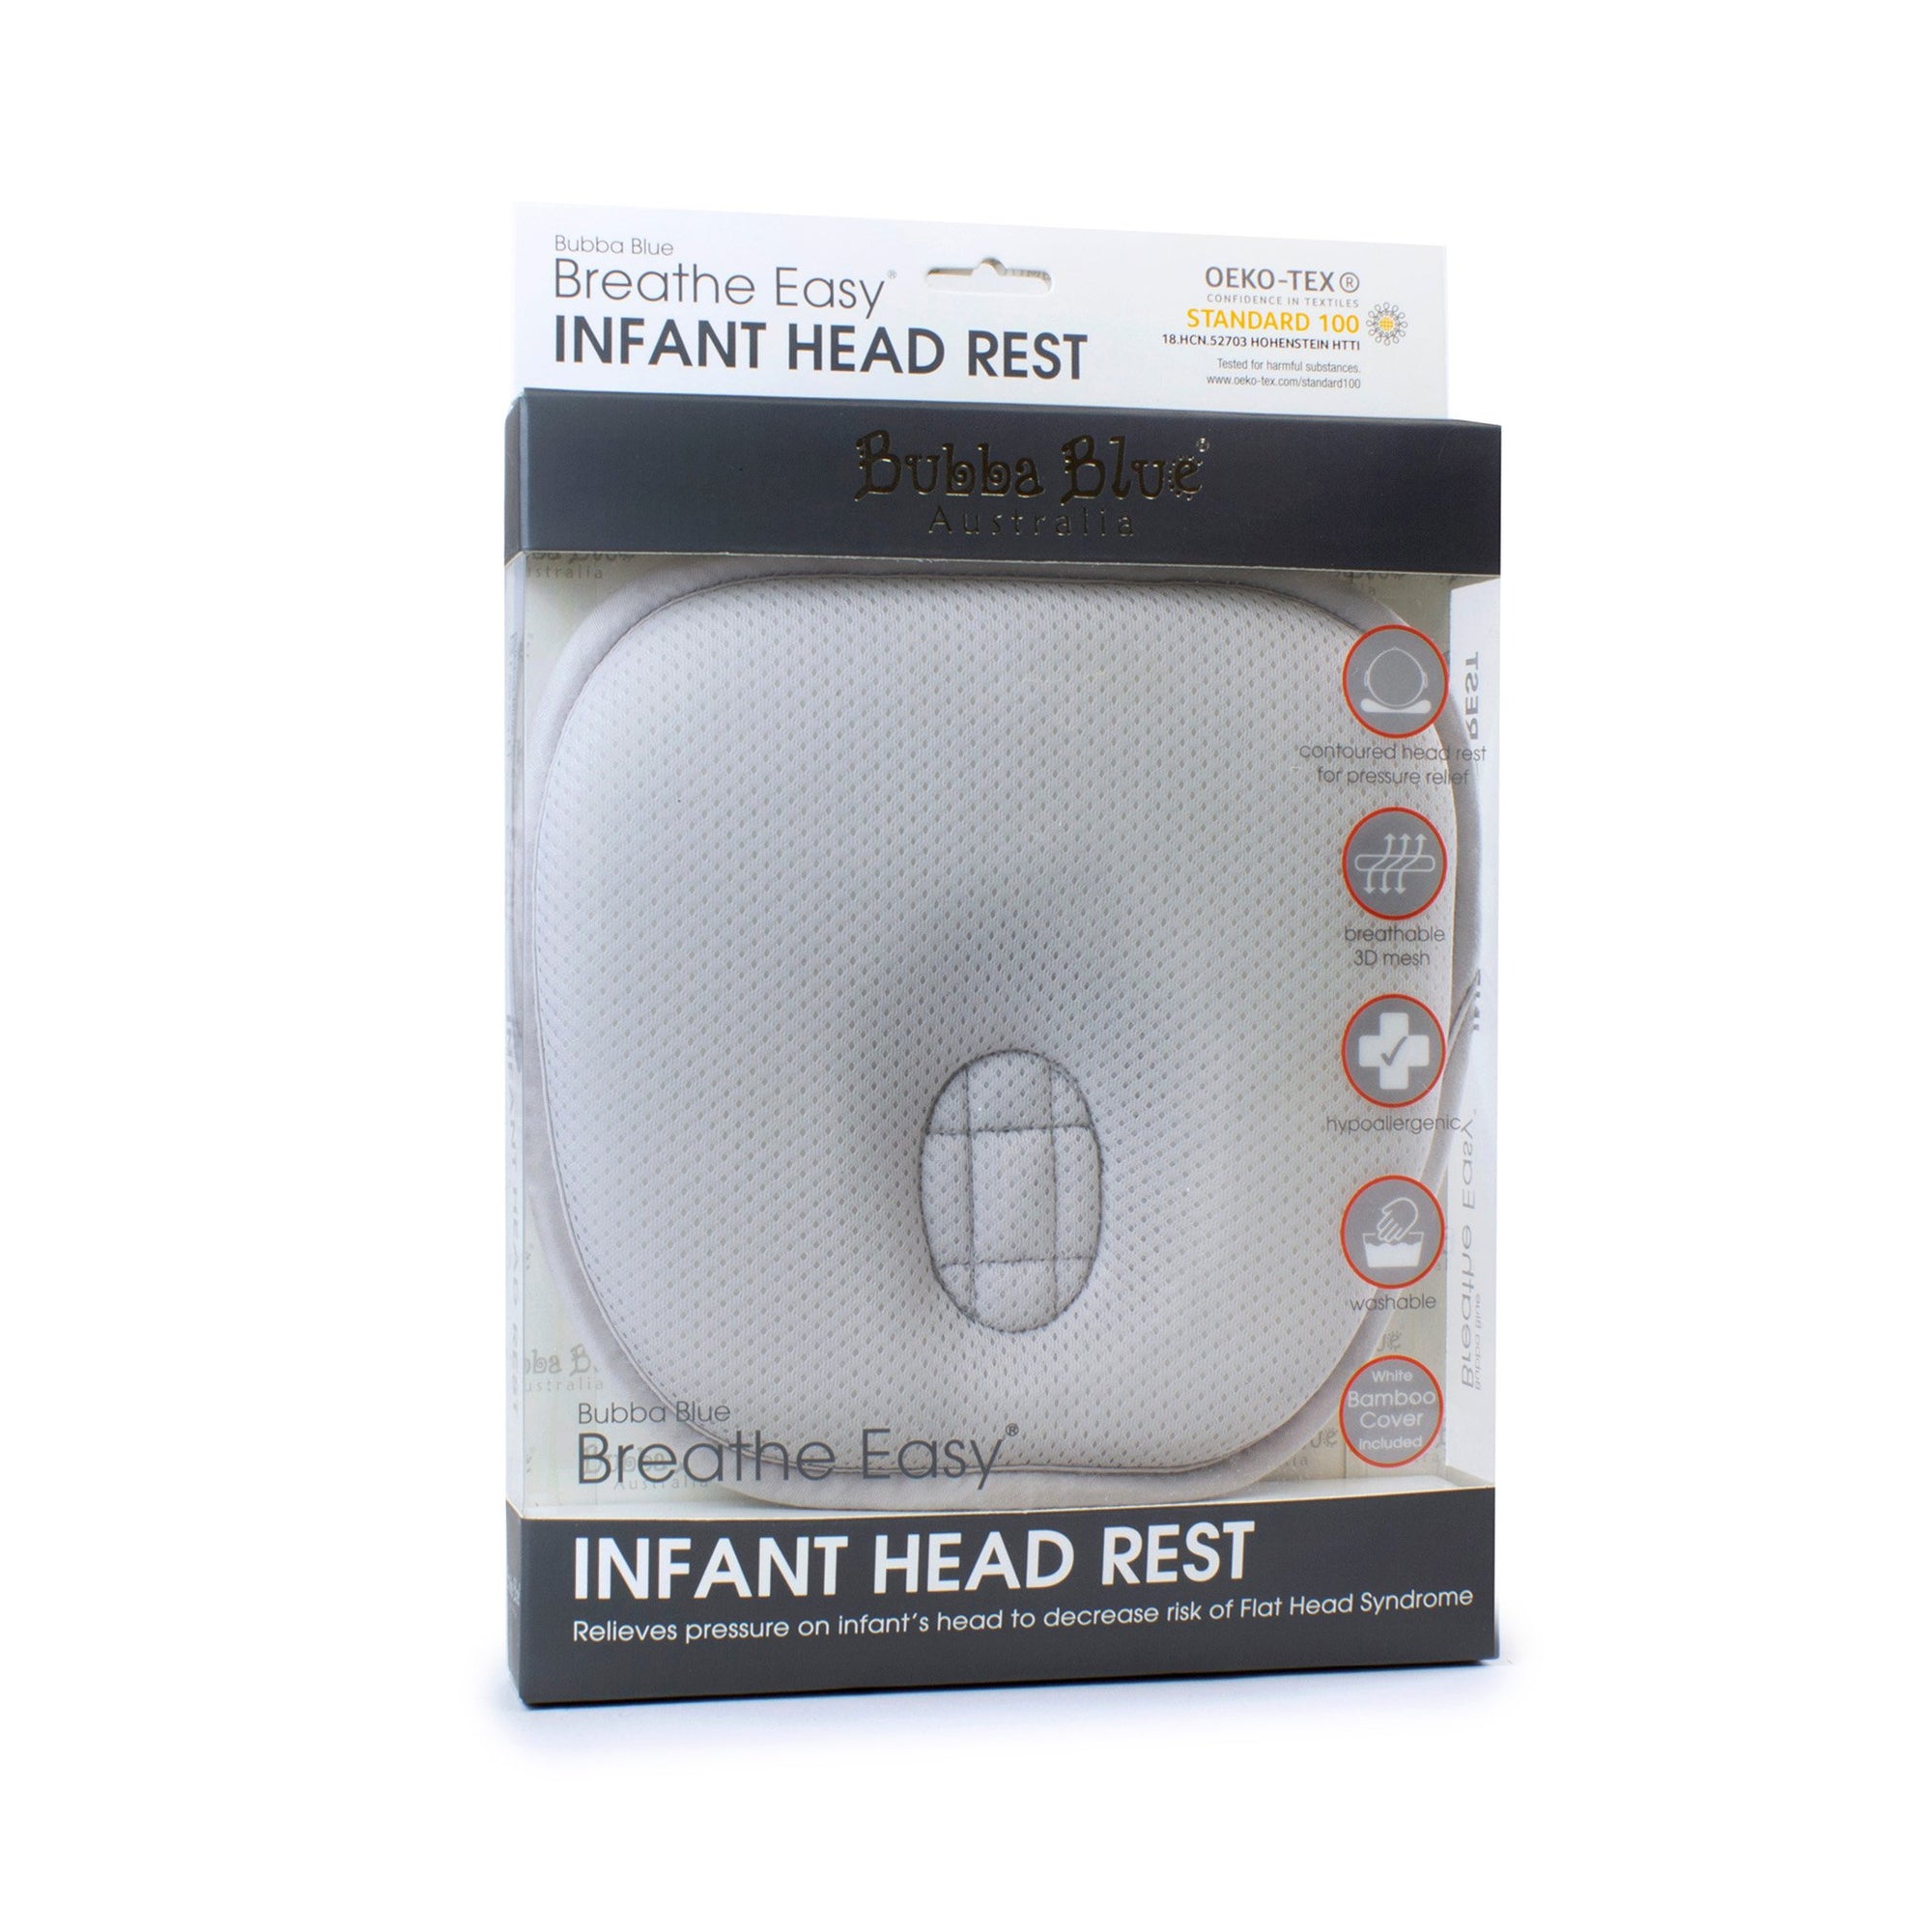 Breath Easy Infant Head Rest